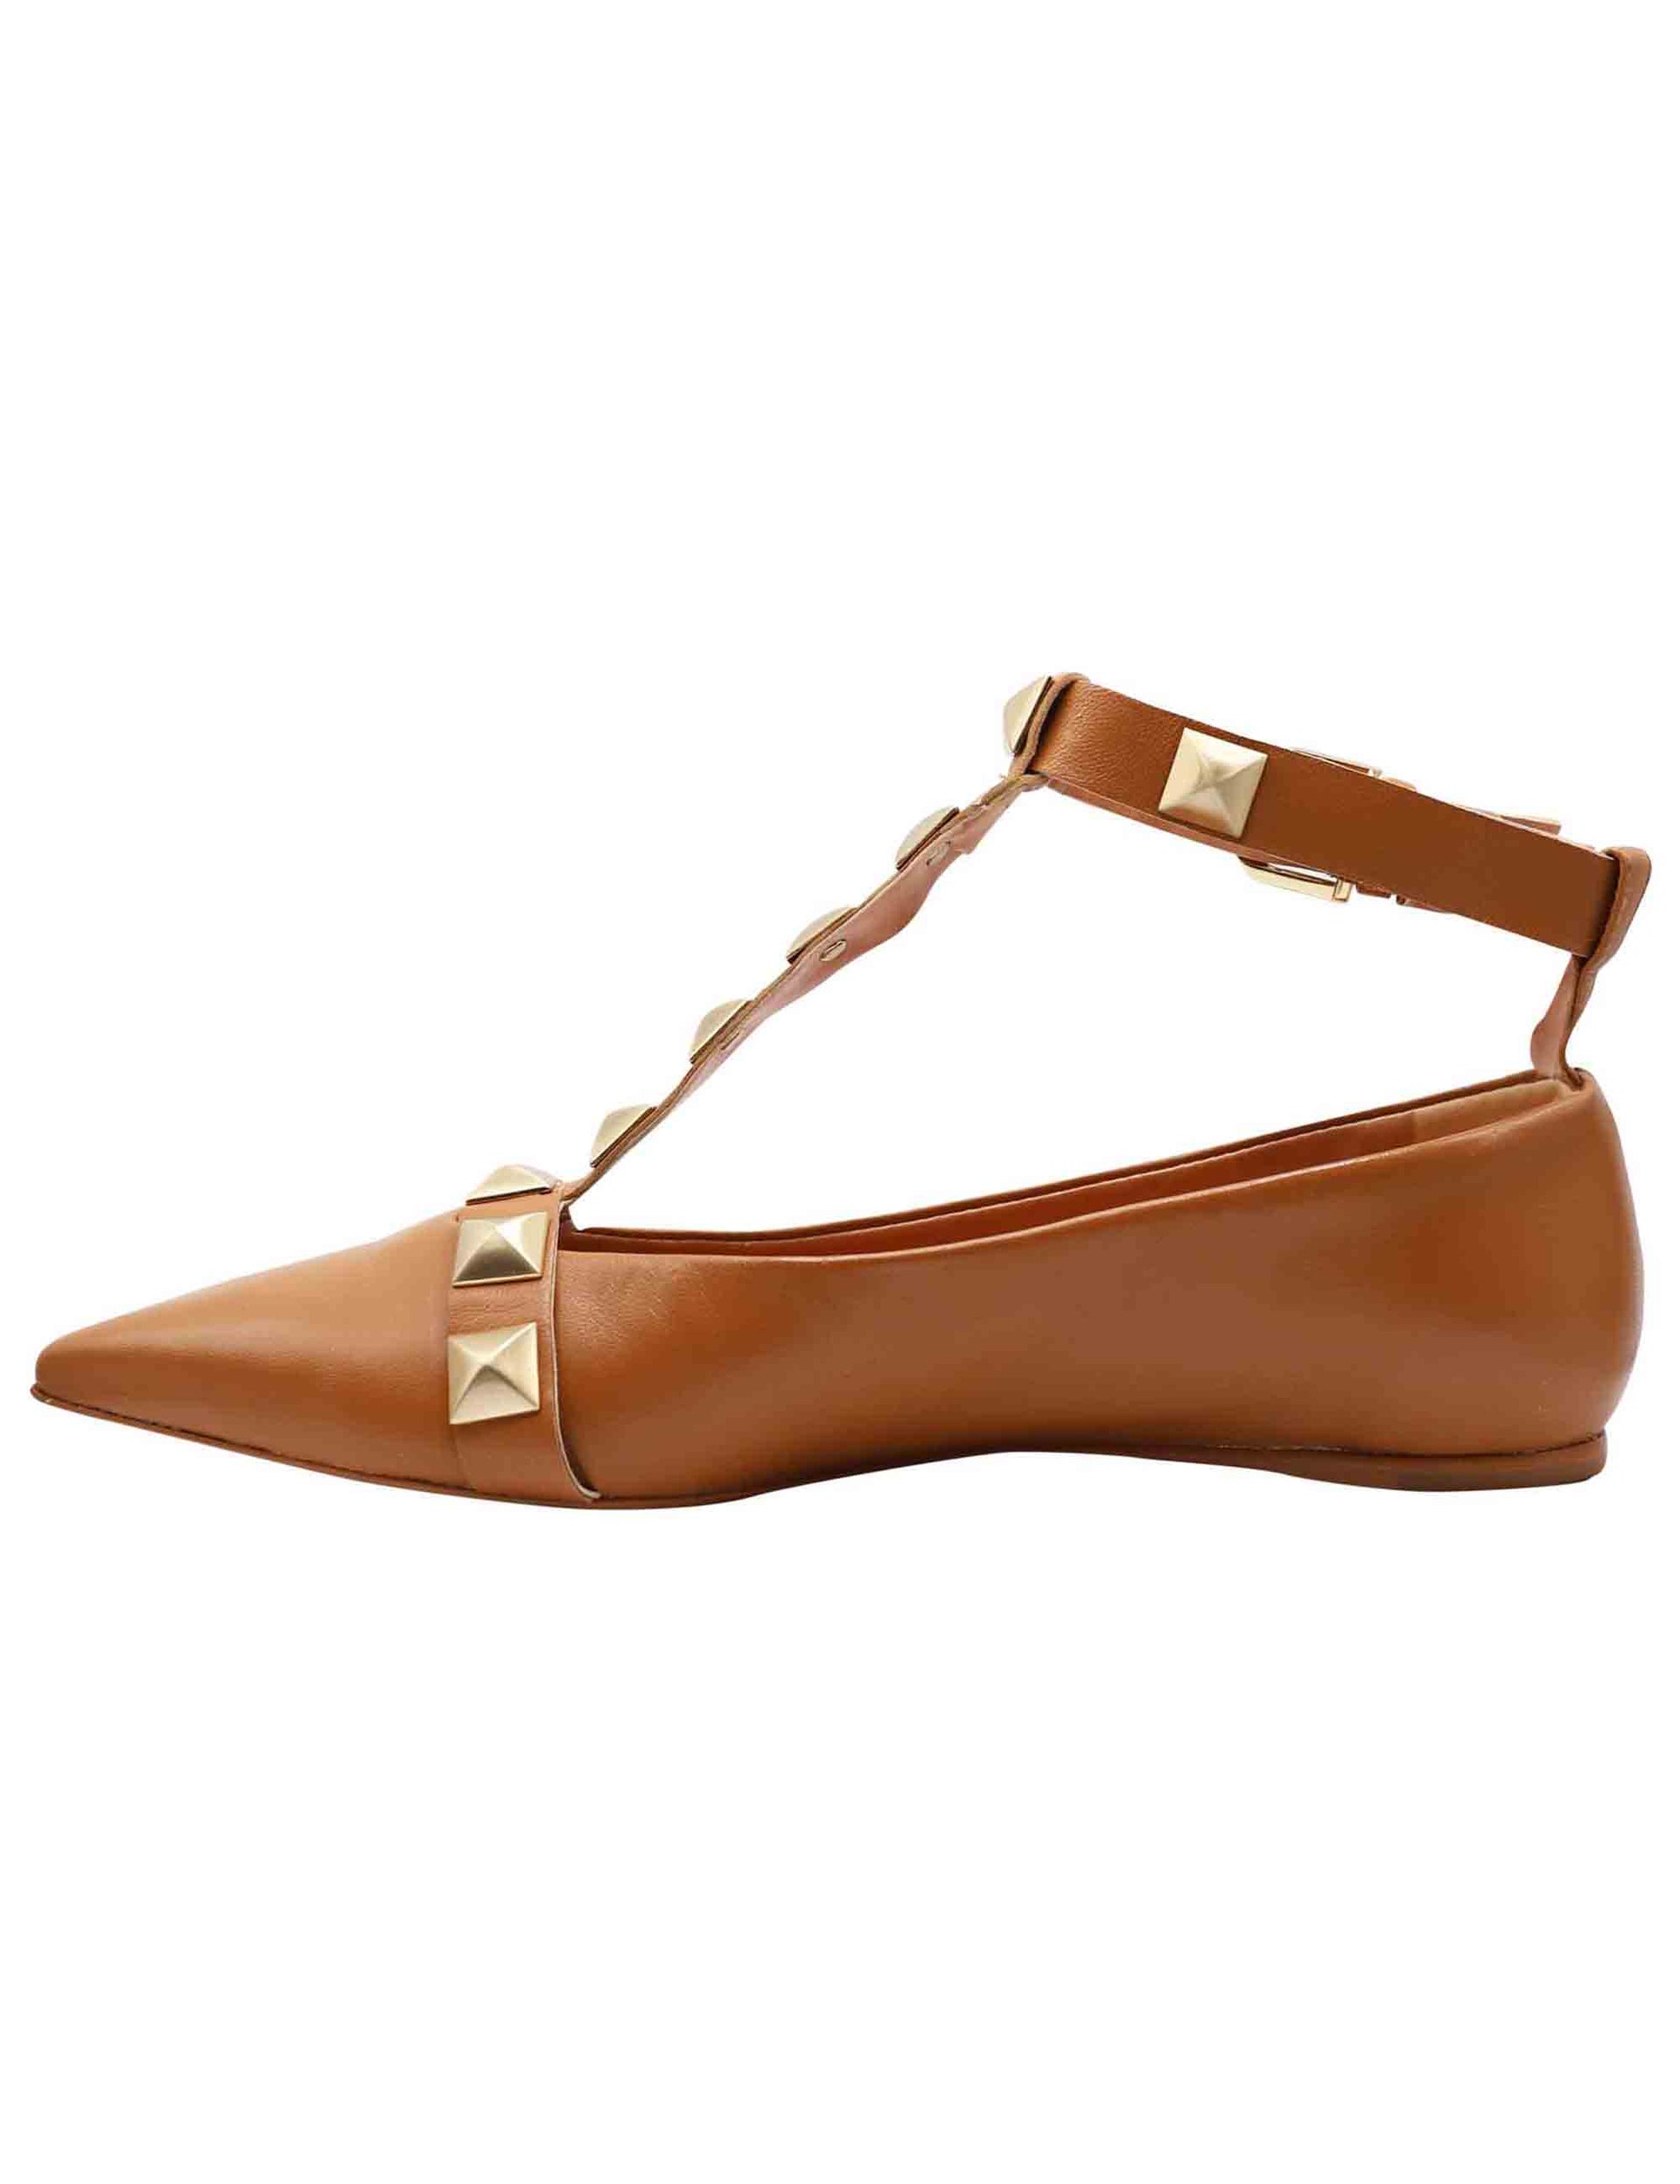 Women's tan leather ballet flats with pointed toe straps and studs